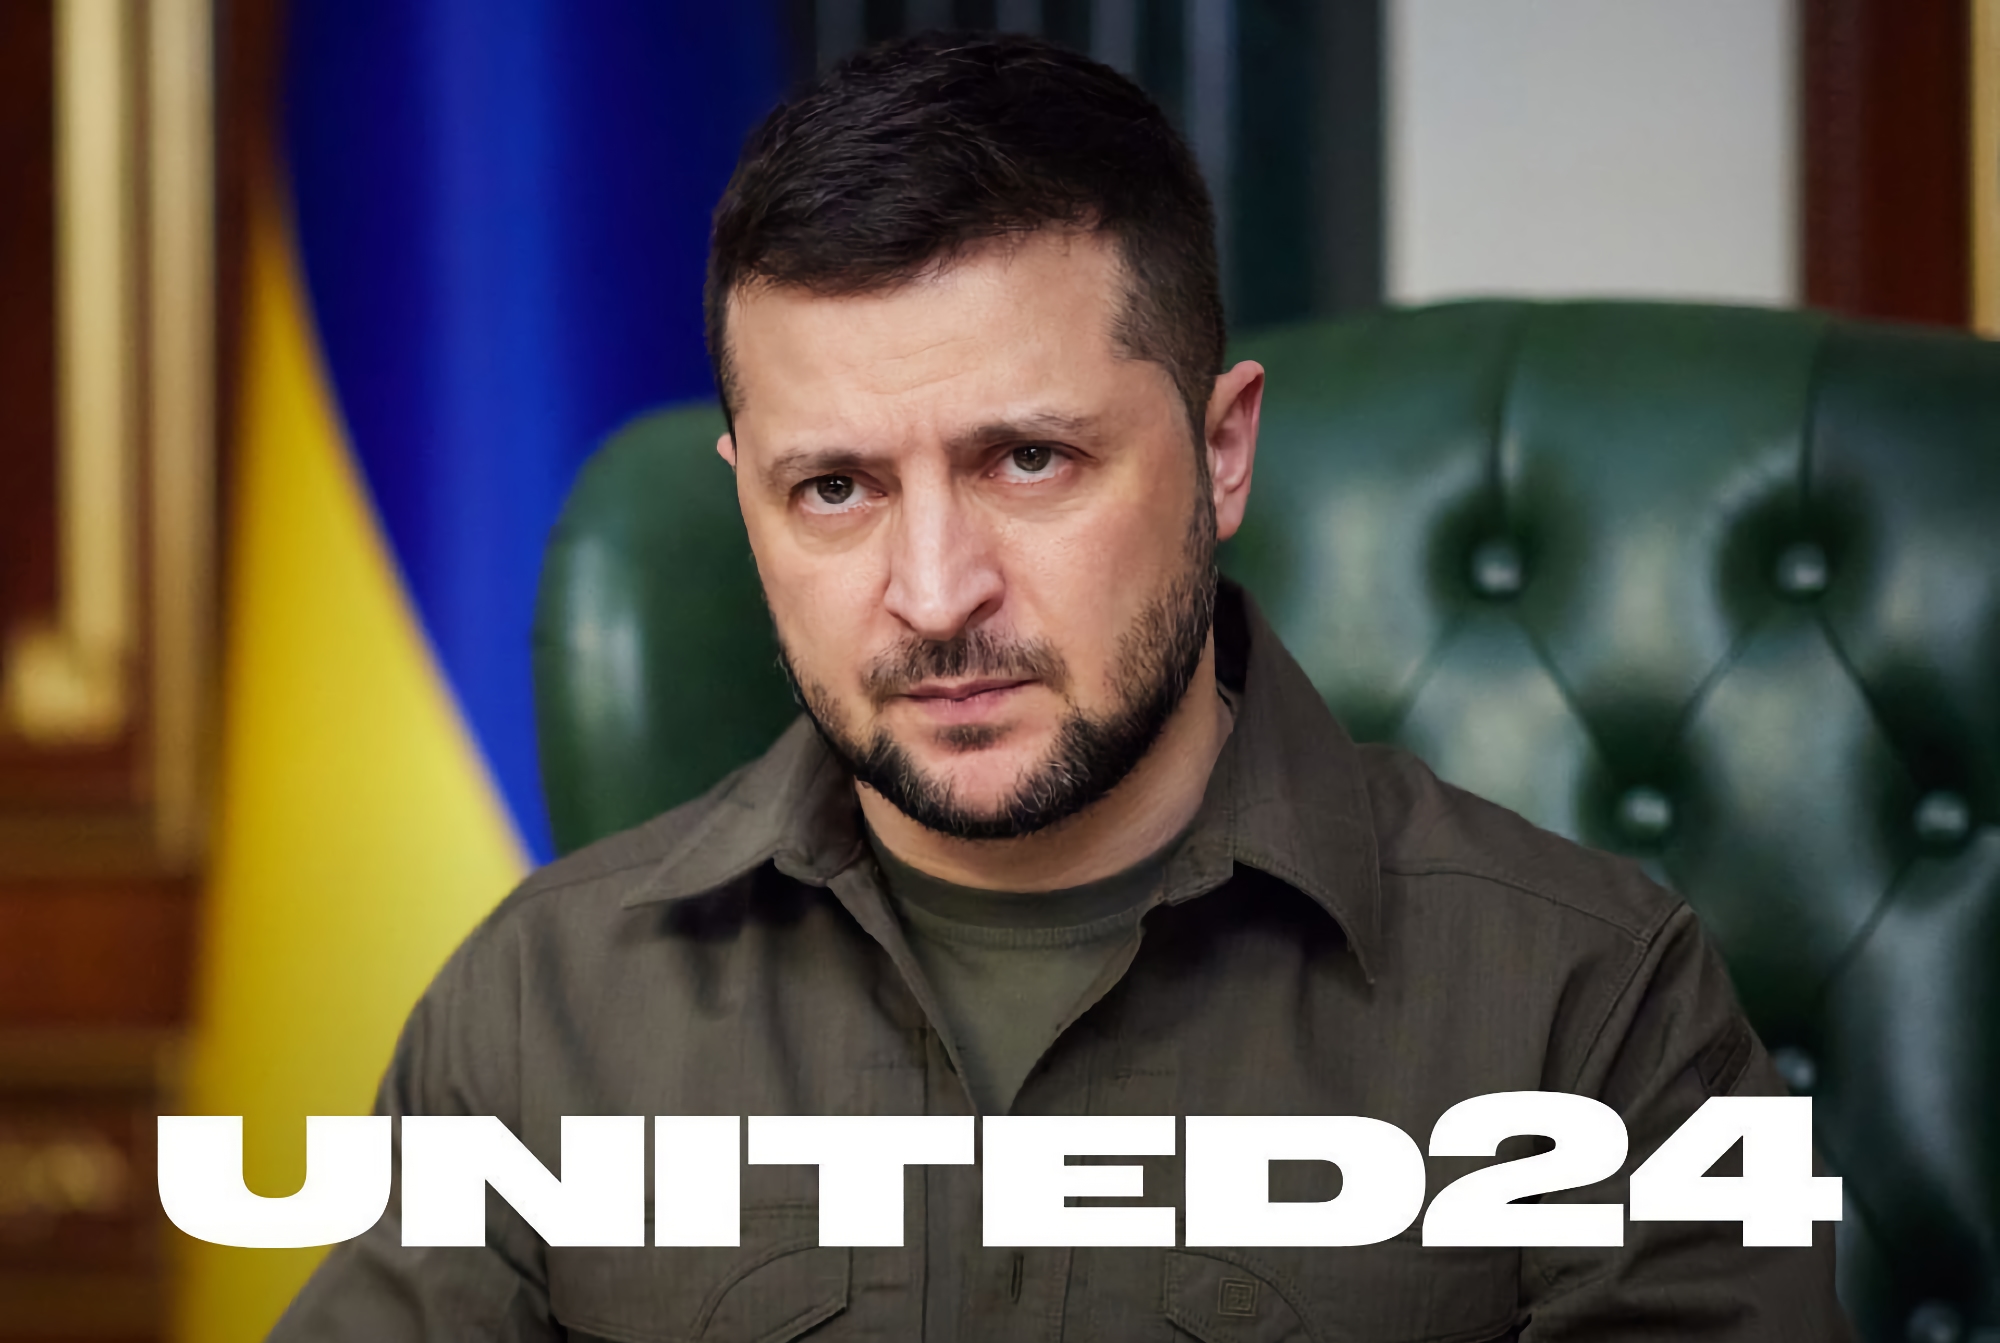 Volodymyr Zelenskyy announced United24: a single platform for raising funds to support Ukraine